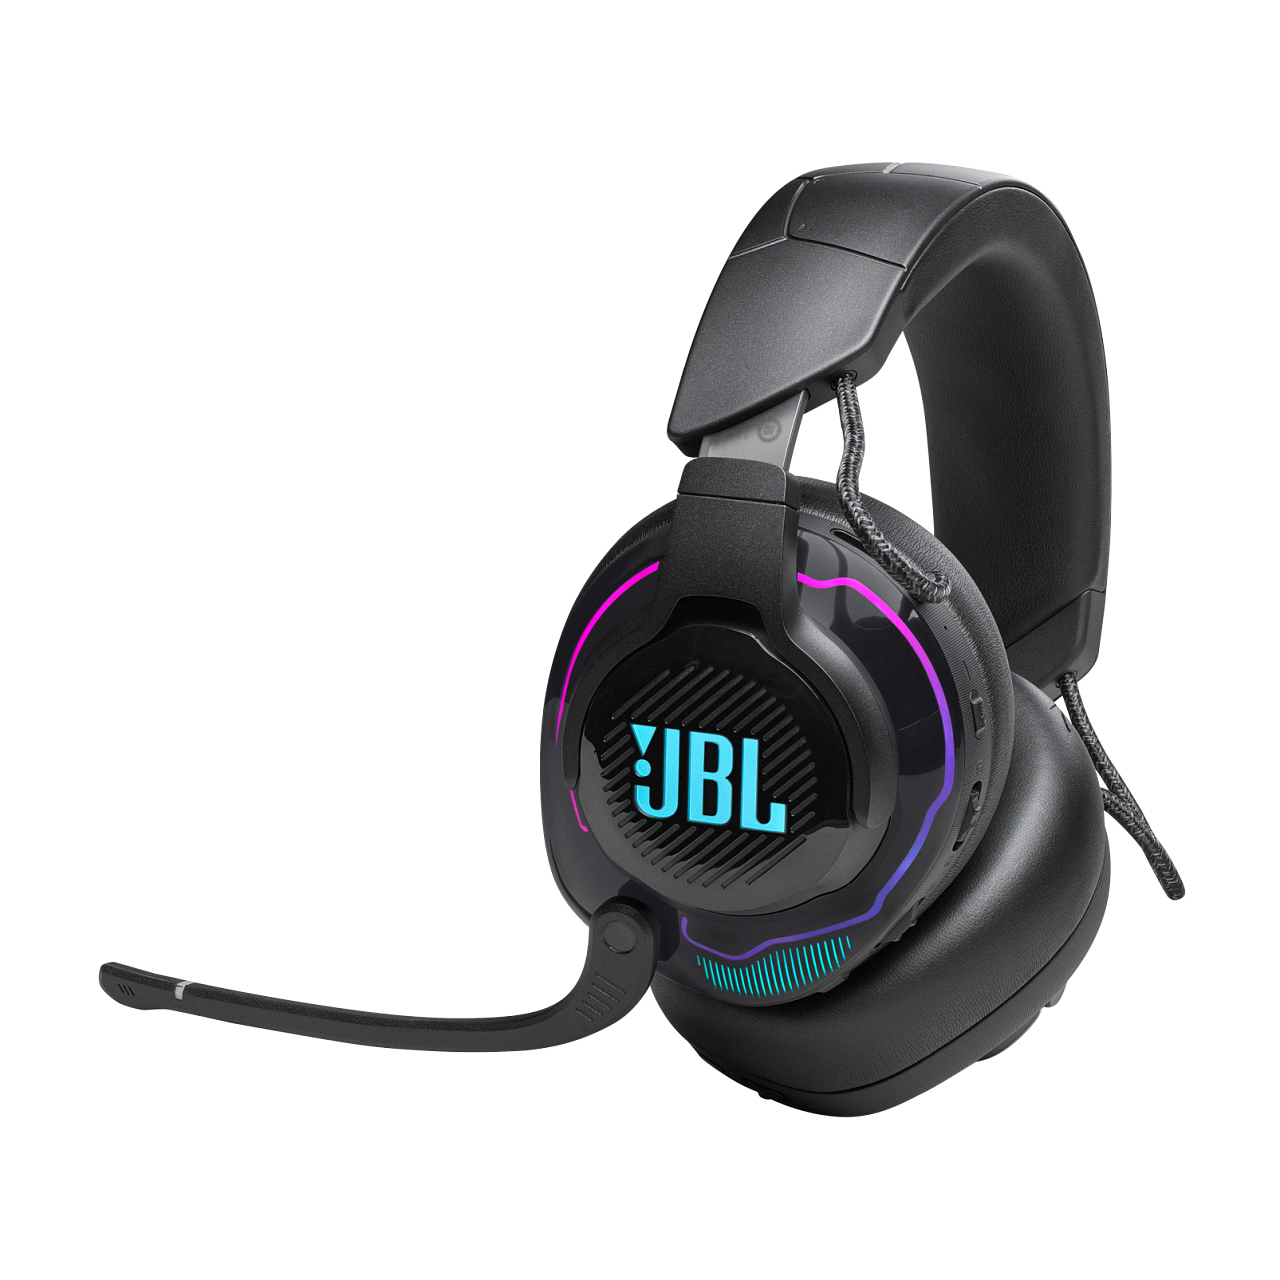 für Switch JBL 910 PC, Black Bluetooth Handy, Headset und Quantum Headset PS4/PS5, XBOX, Over-ear Gaming